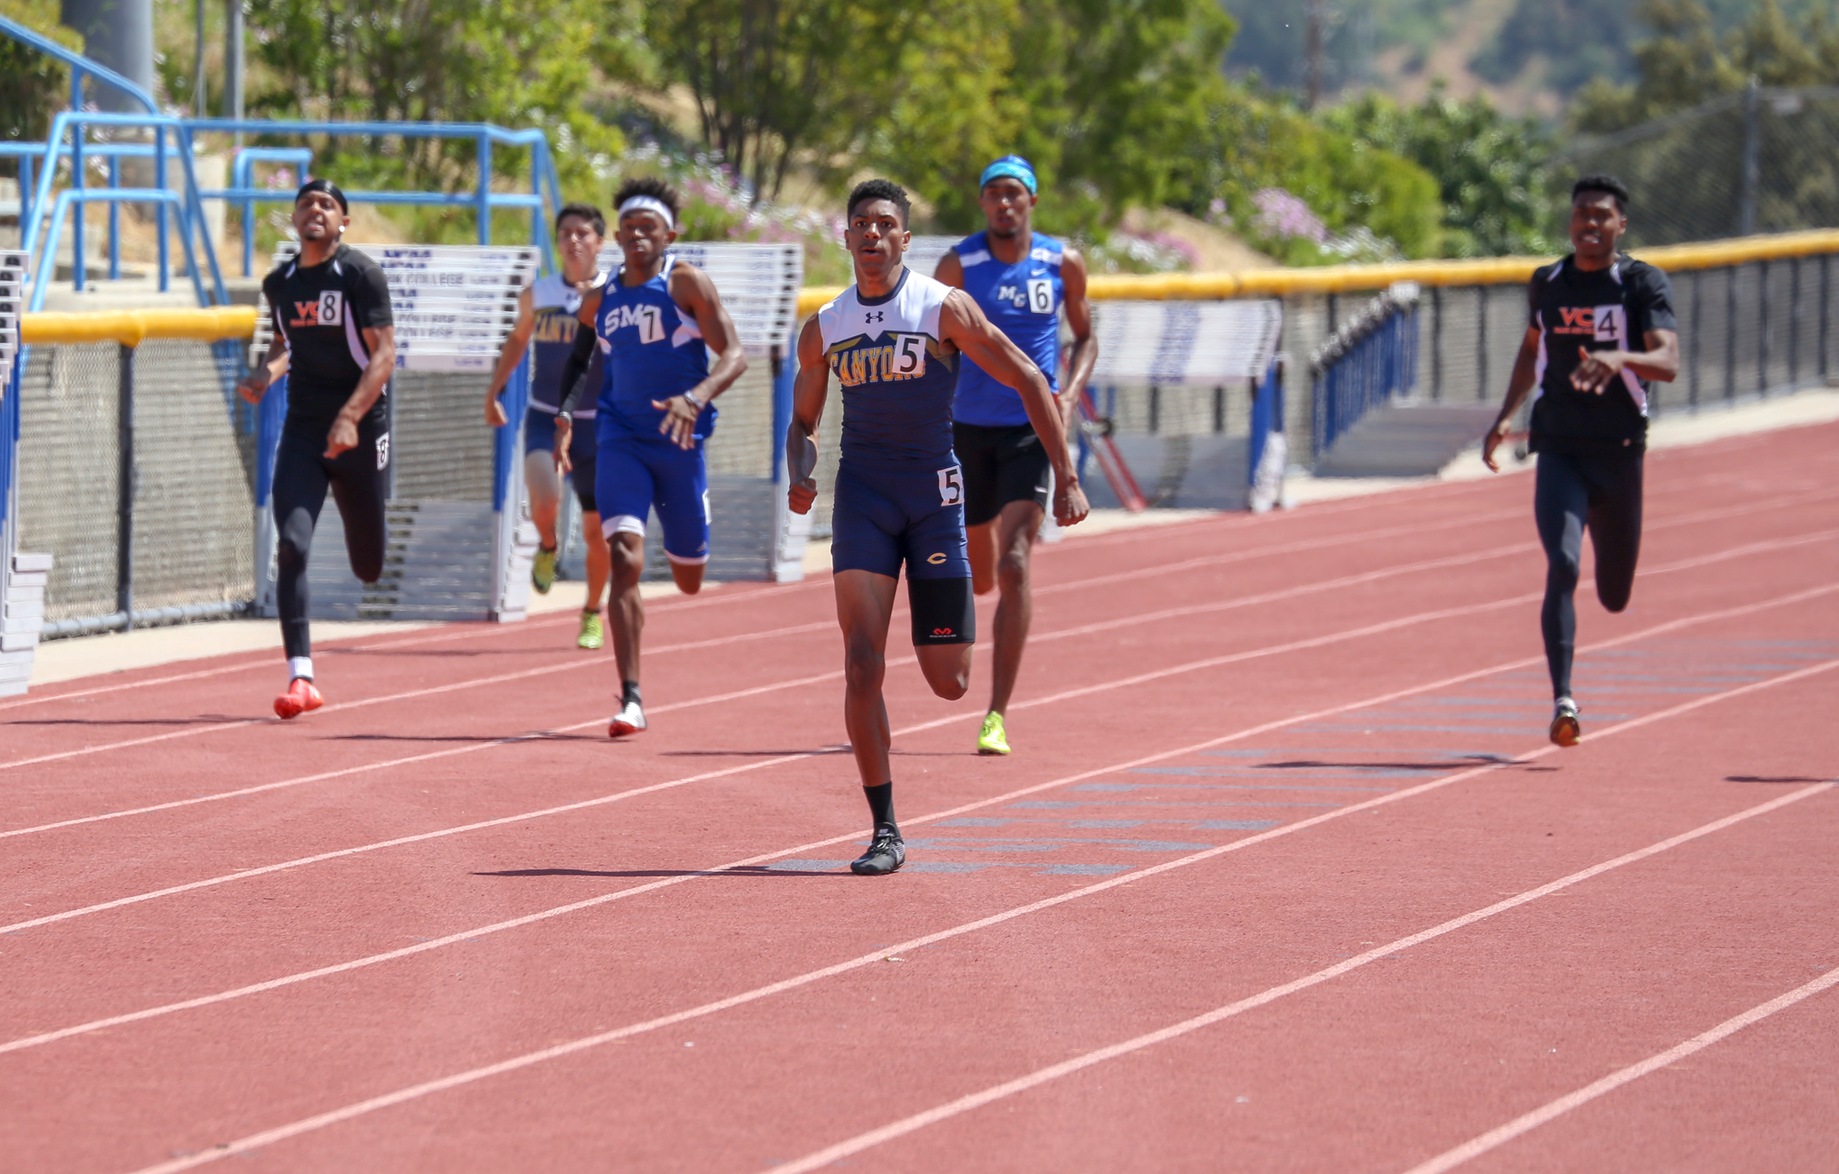 COC freshman Jacob Johnson leads the pack during the 200m event at the 2019 WSC Track & Field Championships.